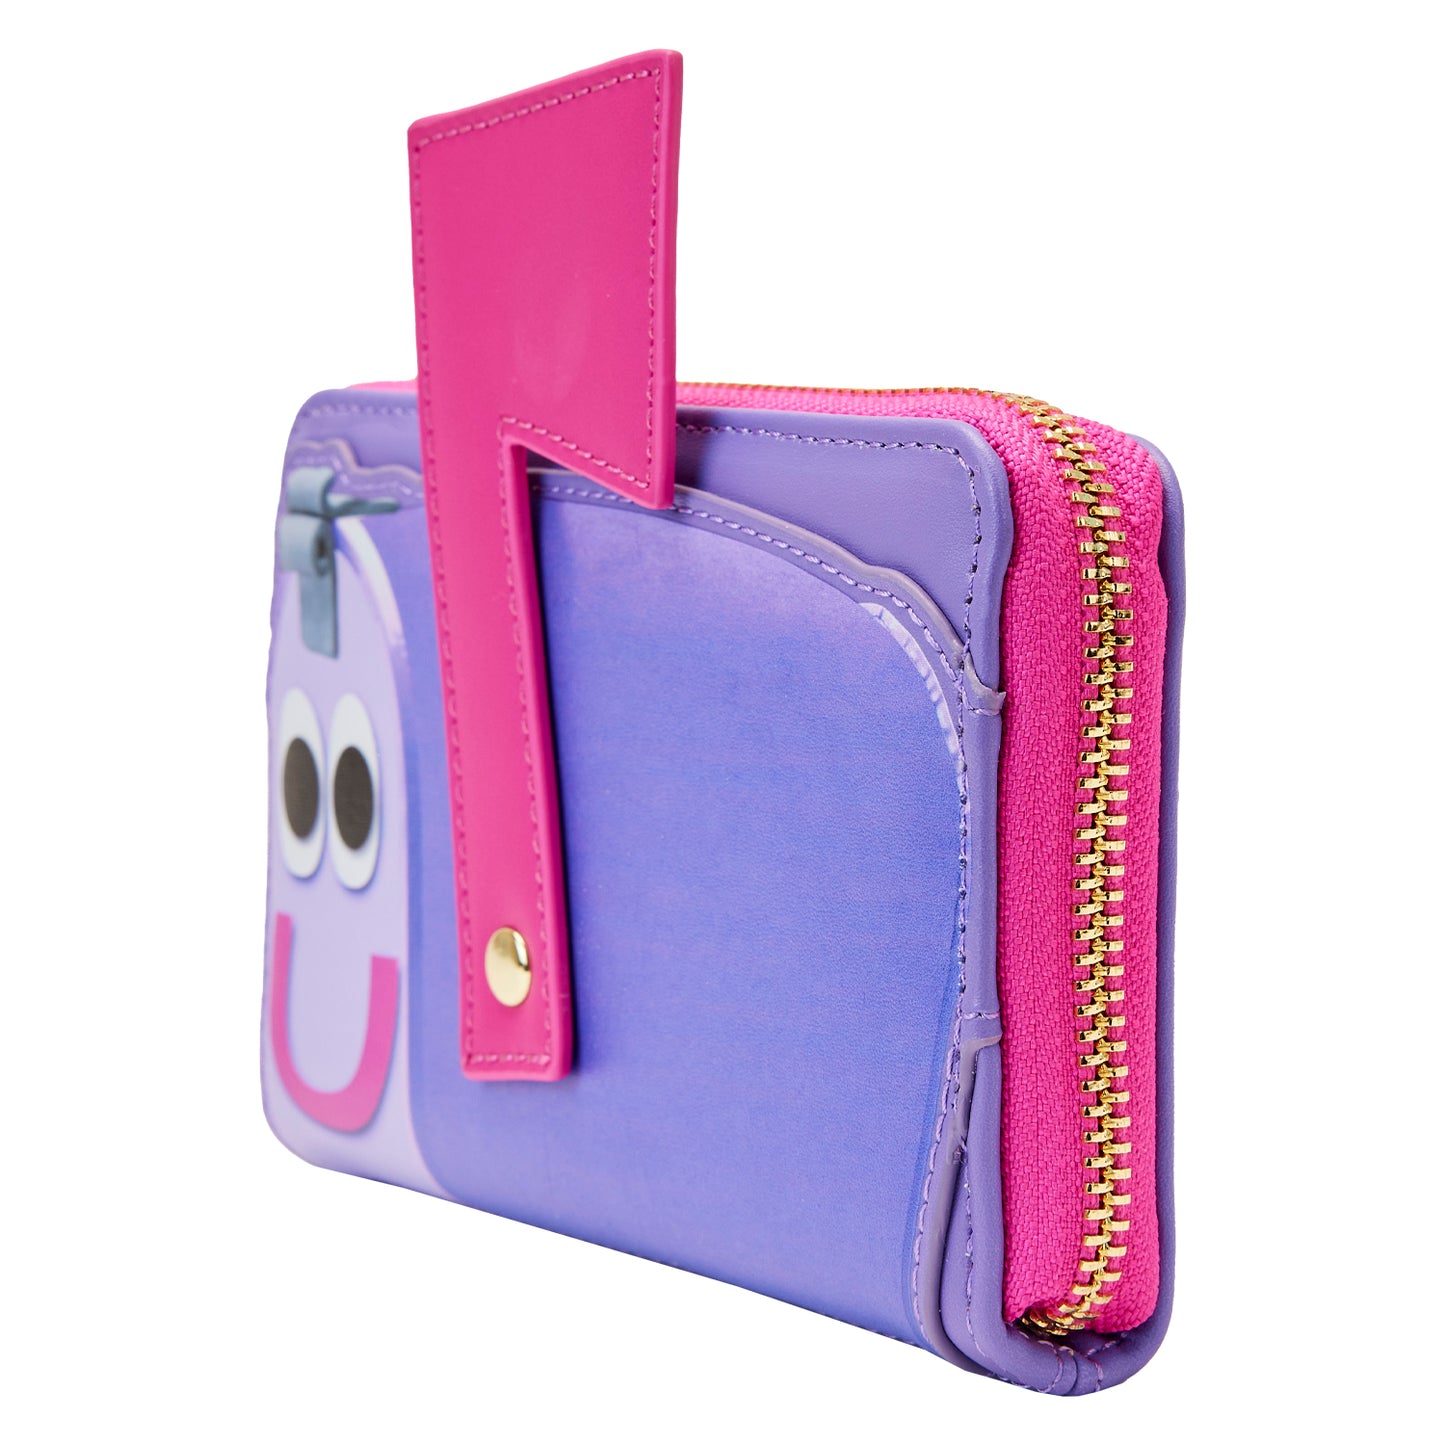 Loungefly Nickelodeon Blues Clues Mail Time Zip-Around Wallet